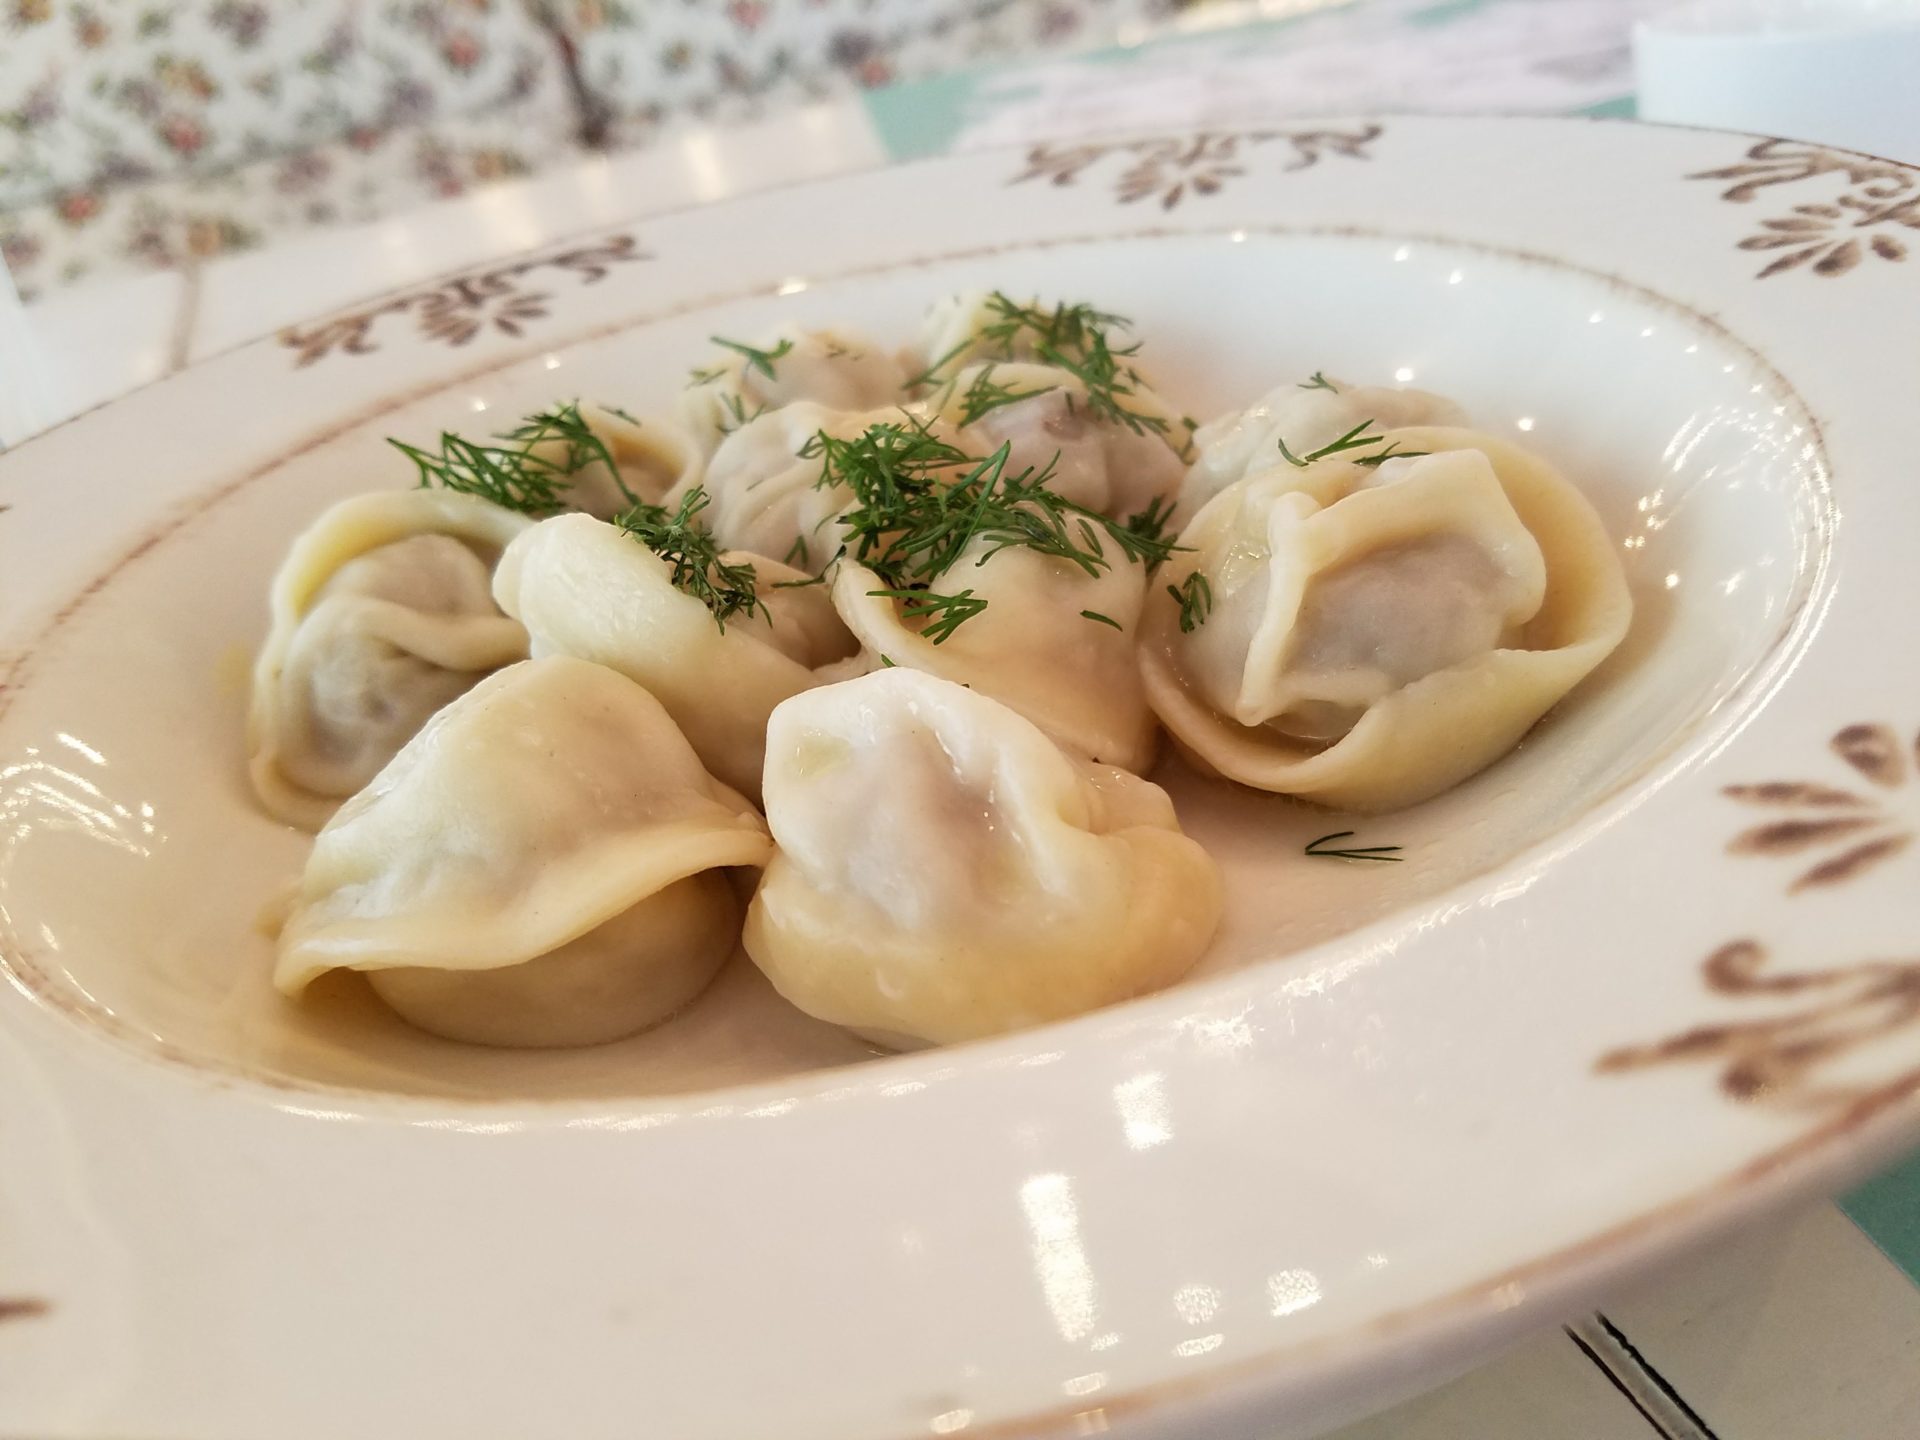 a plate of dumplings with greens on it